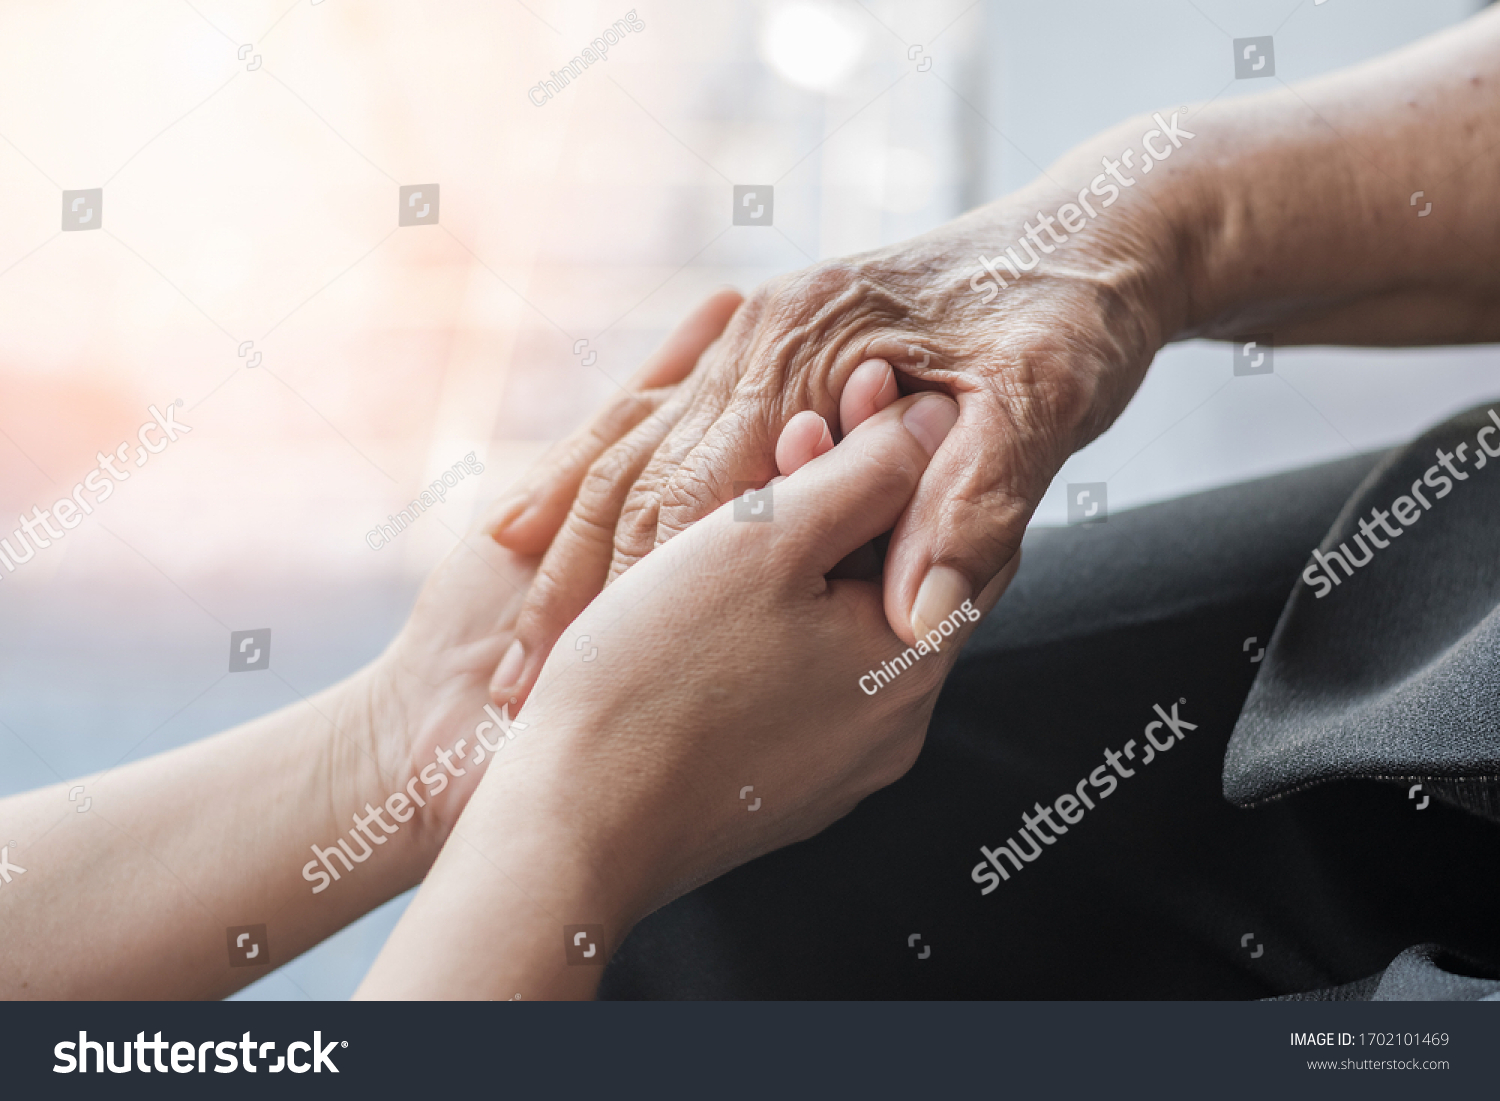 Parkinson disease patient, Alzheimer elderly senior, Arthritis person's hand in support of nursing family caregiver care for disability awareness day, National care givers month, ageing society  #1702101469